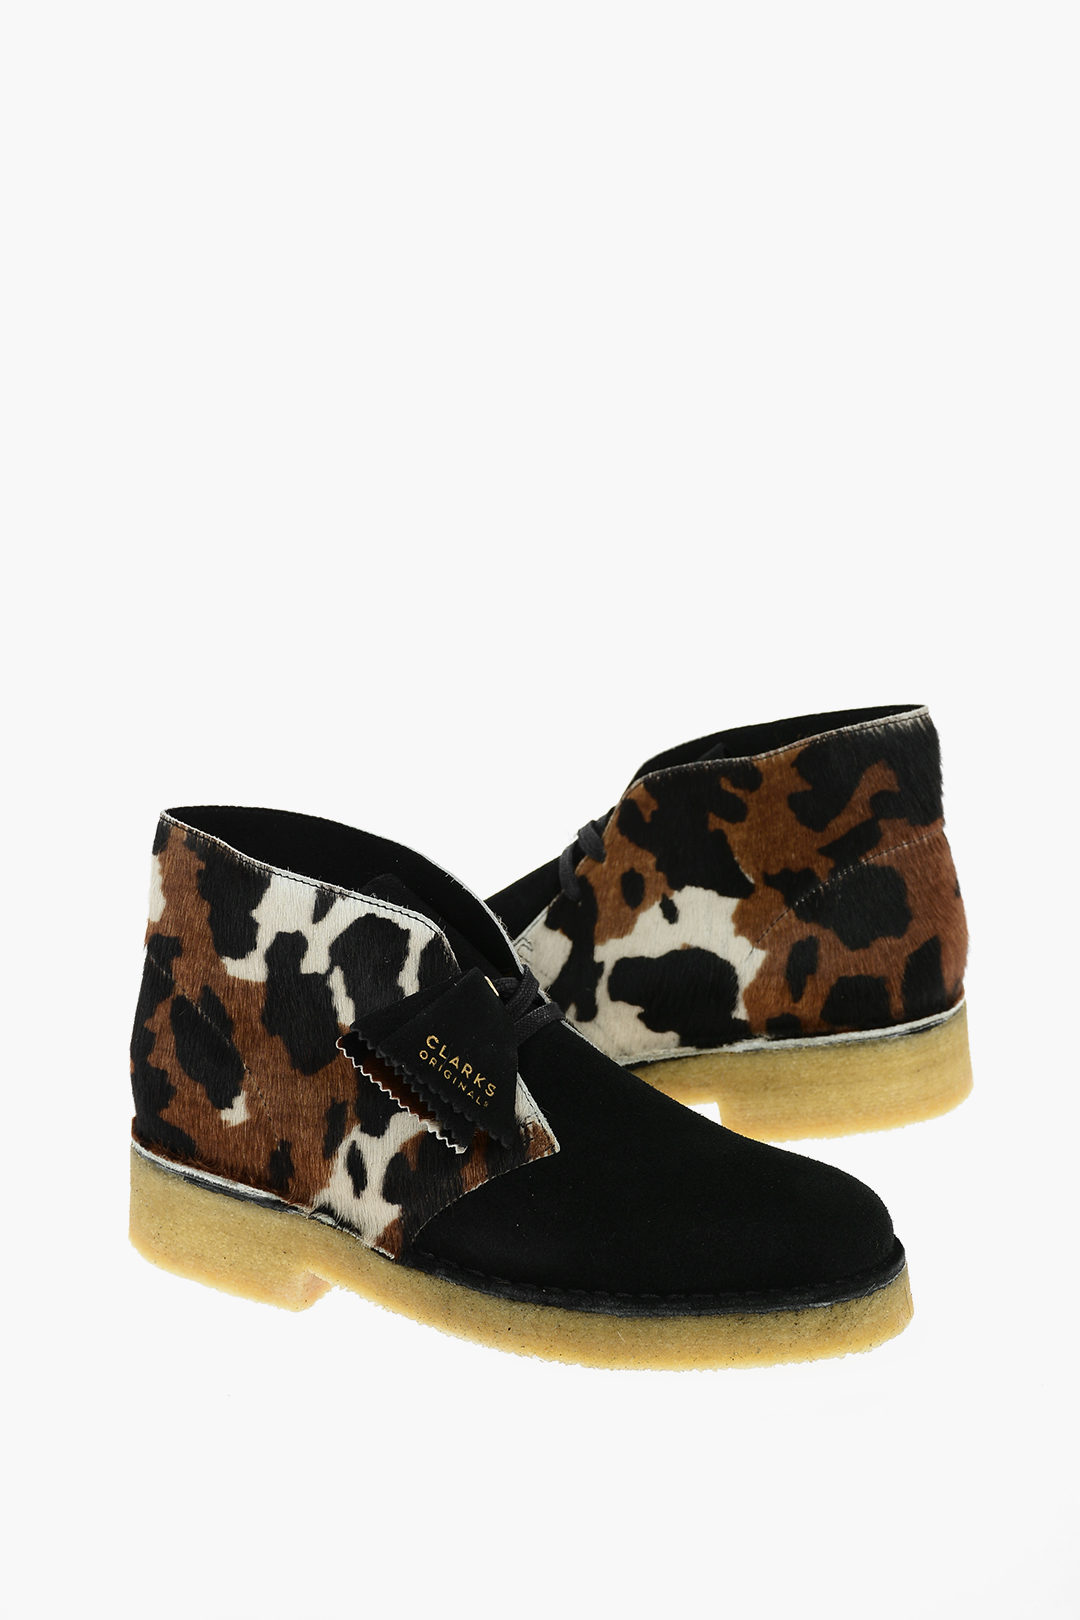 Clarks Animal Patterned Suede Leather and Ponyskin Desert Boots women -  Glamood Outlet